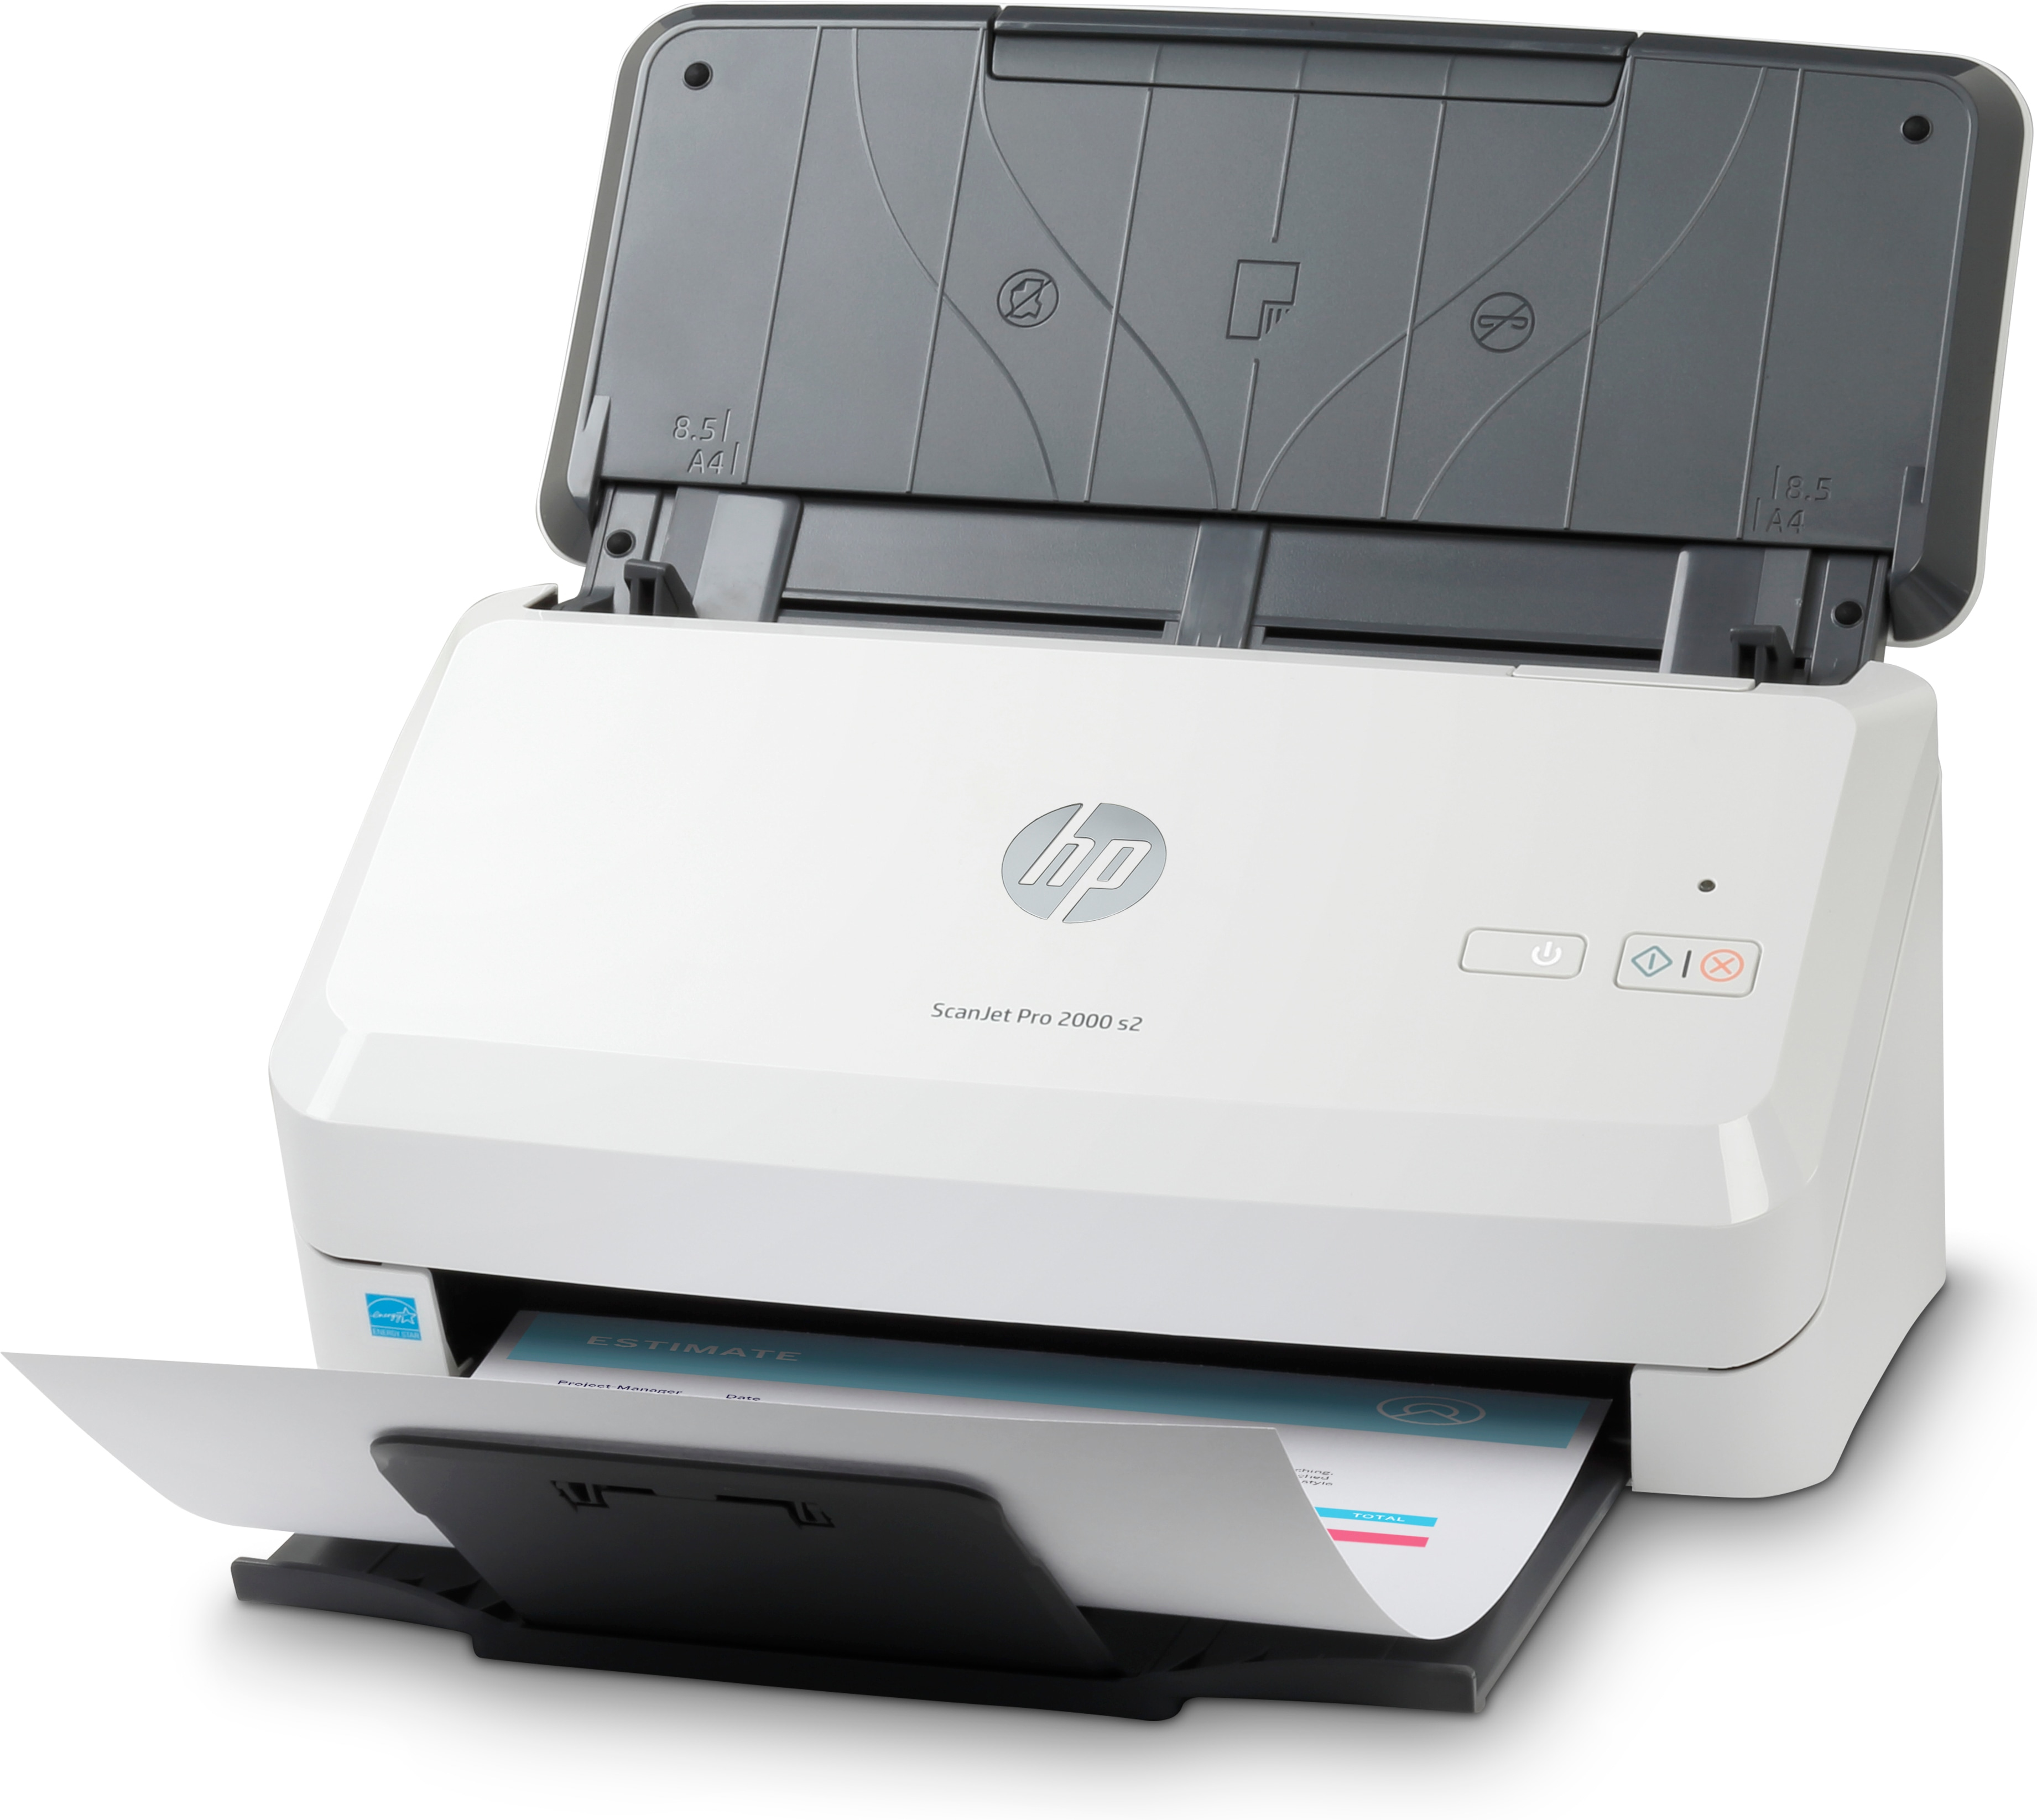 hp easy scan breaks up images into individual scans